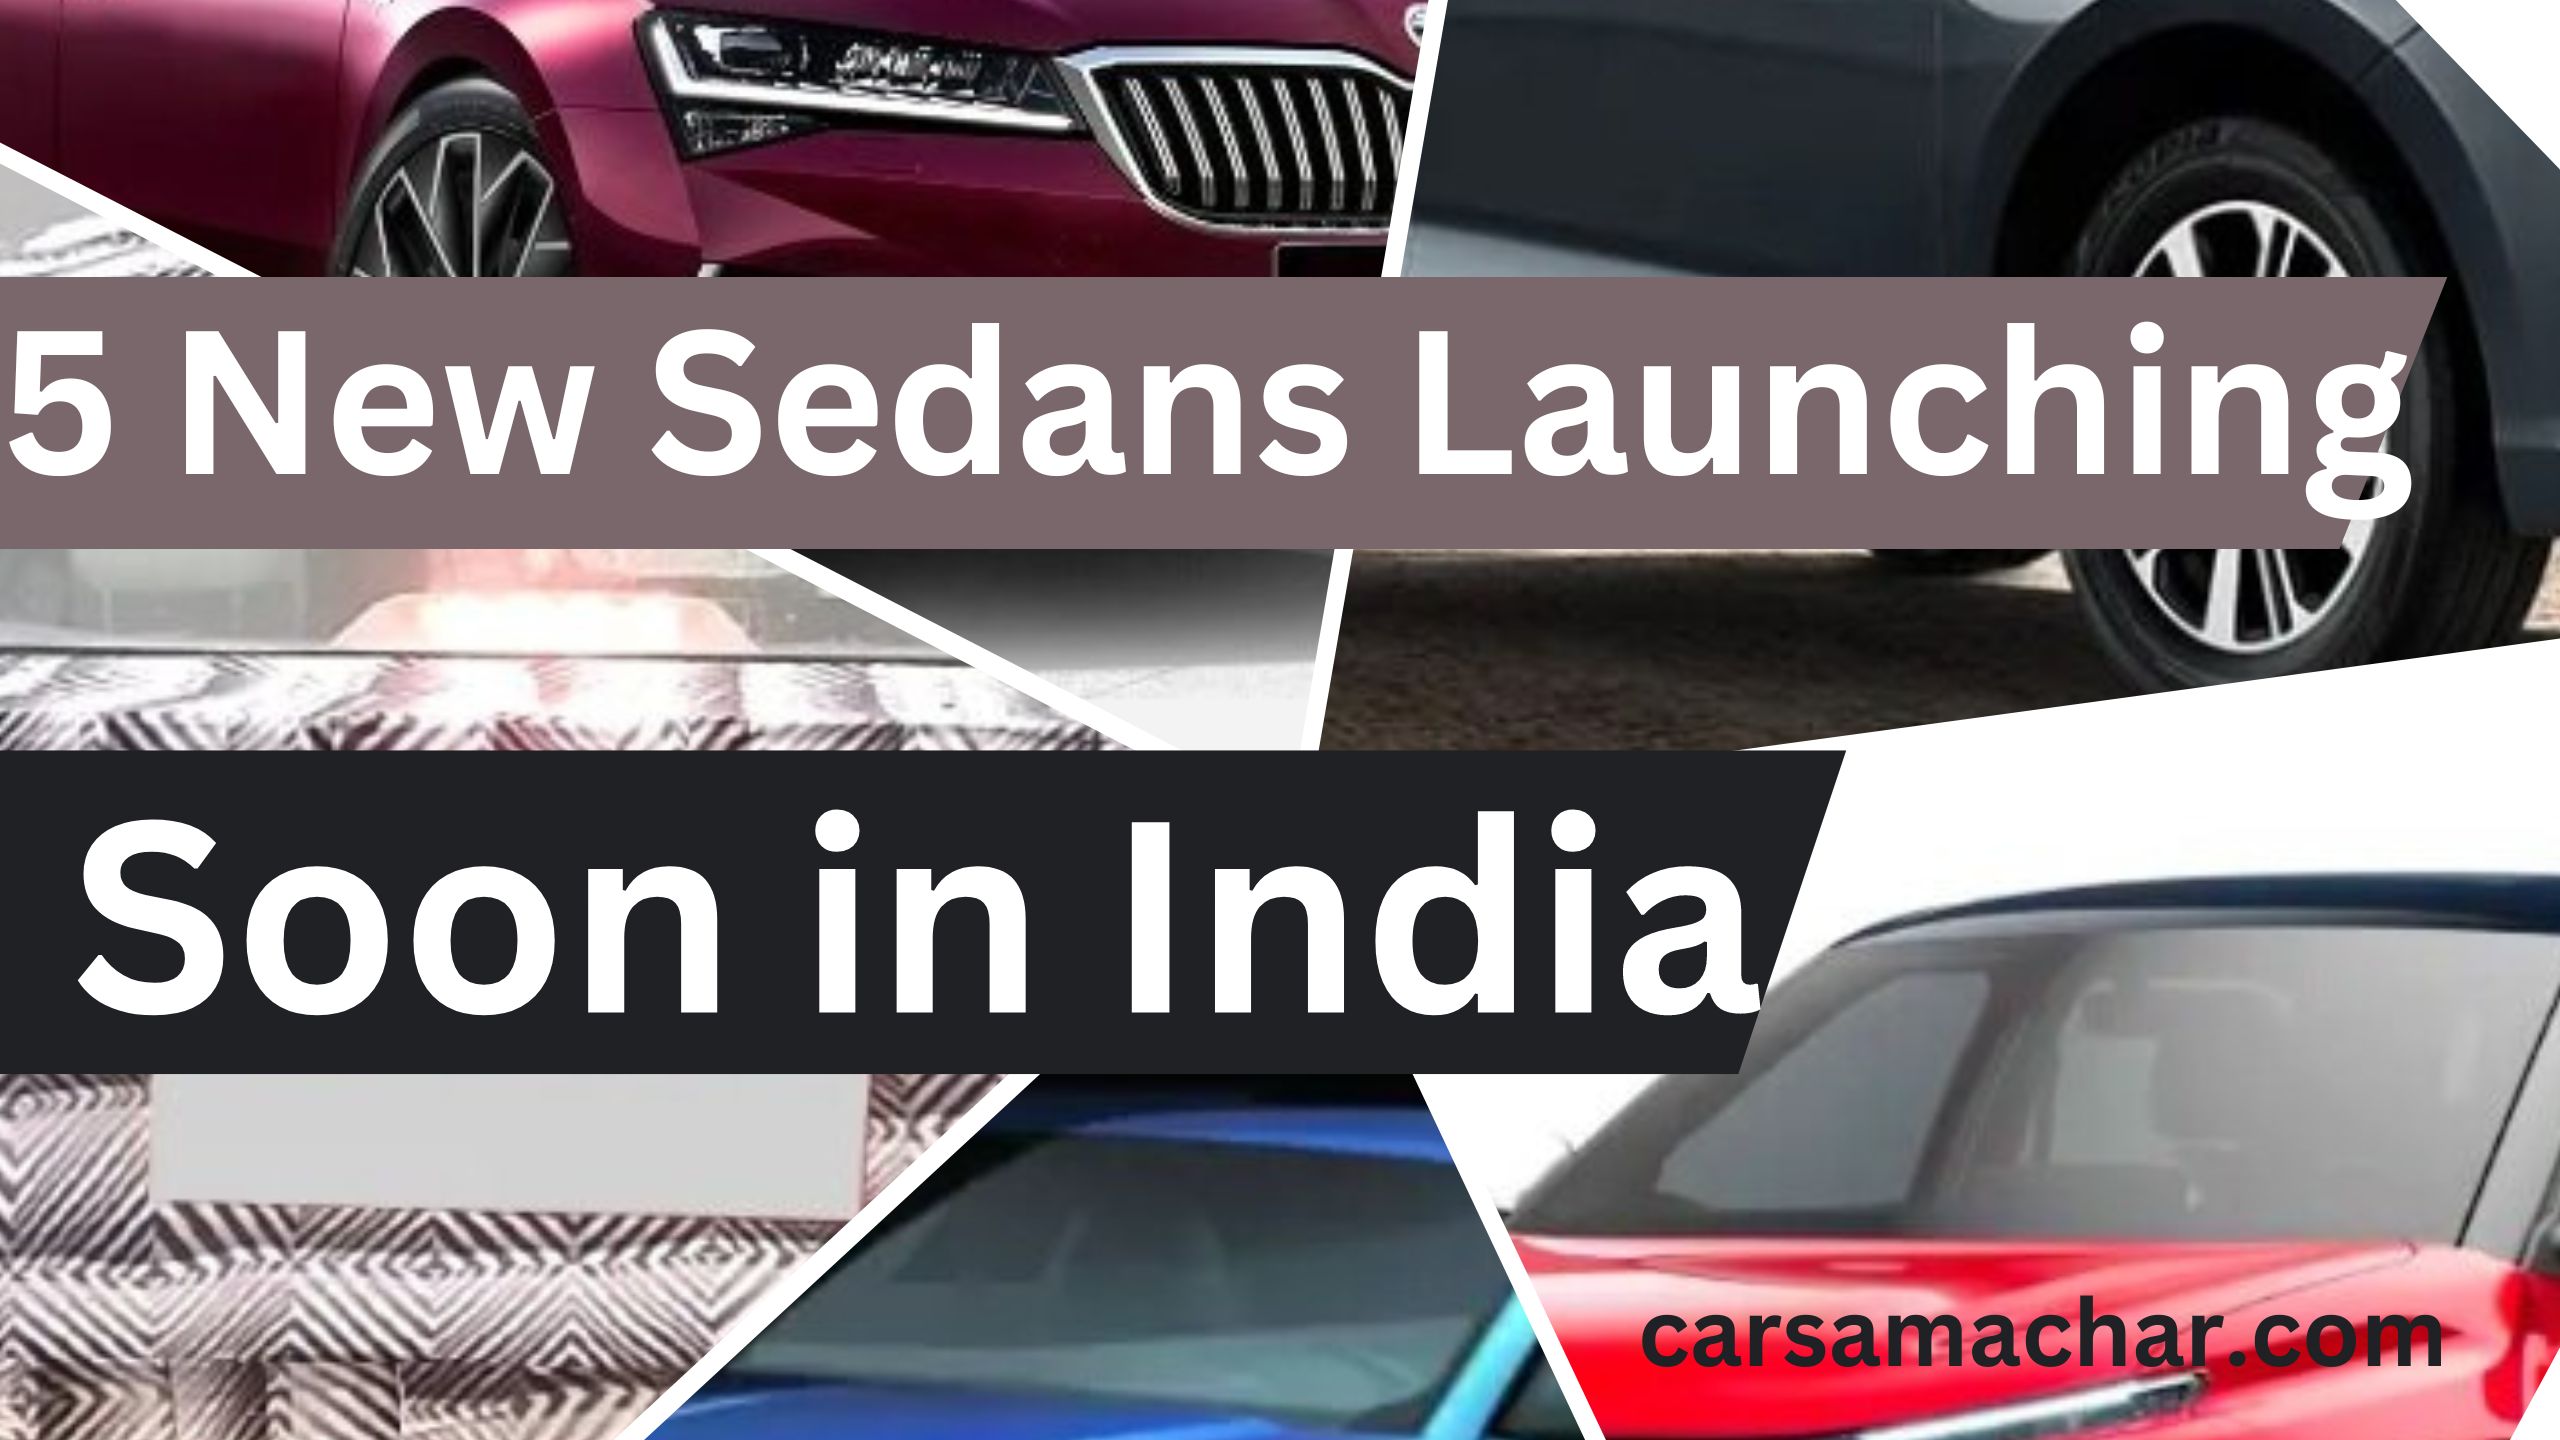 5 New Sedans Launching Soon in India To Revolutionize The World